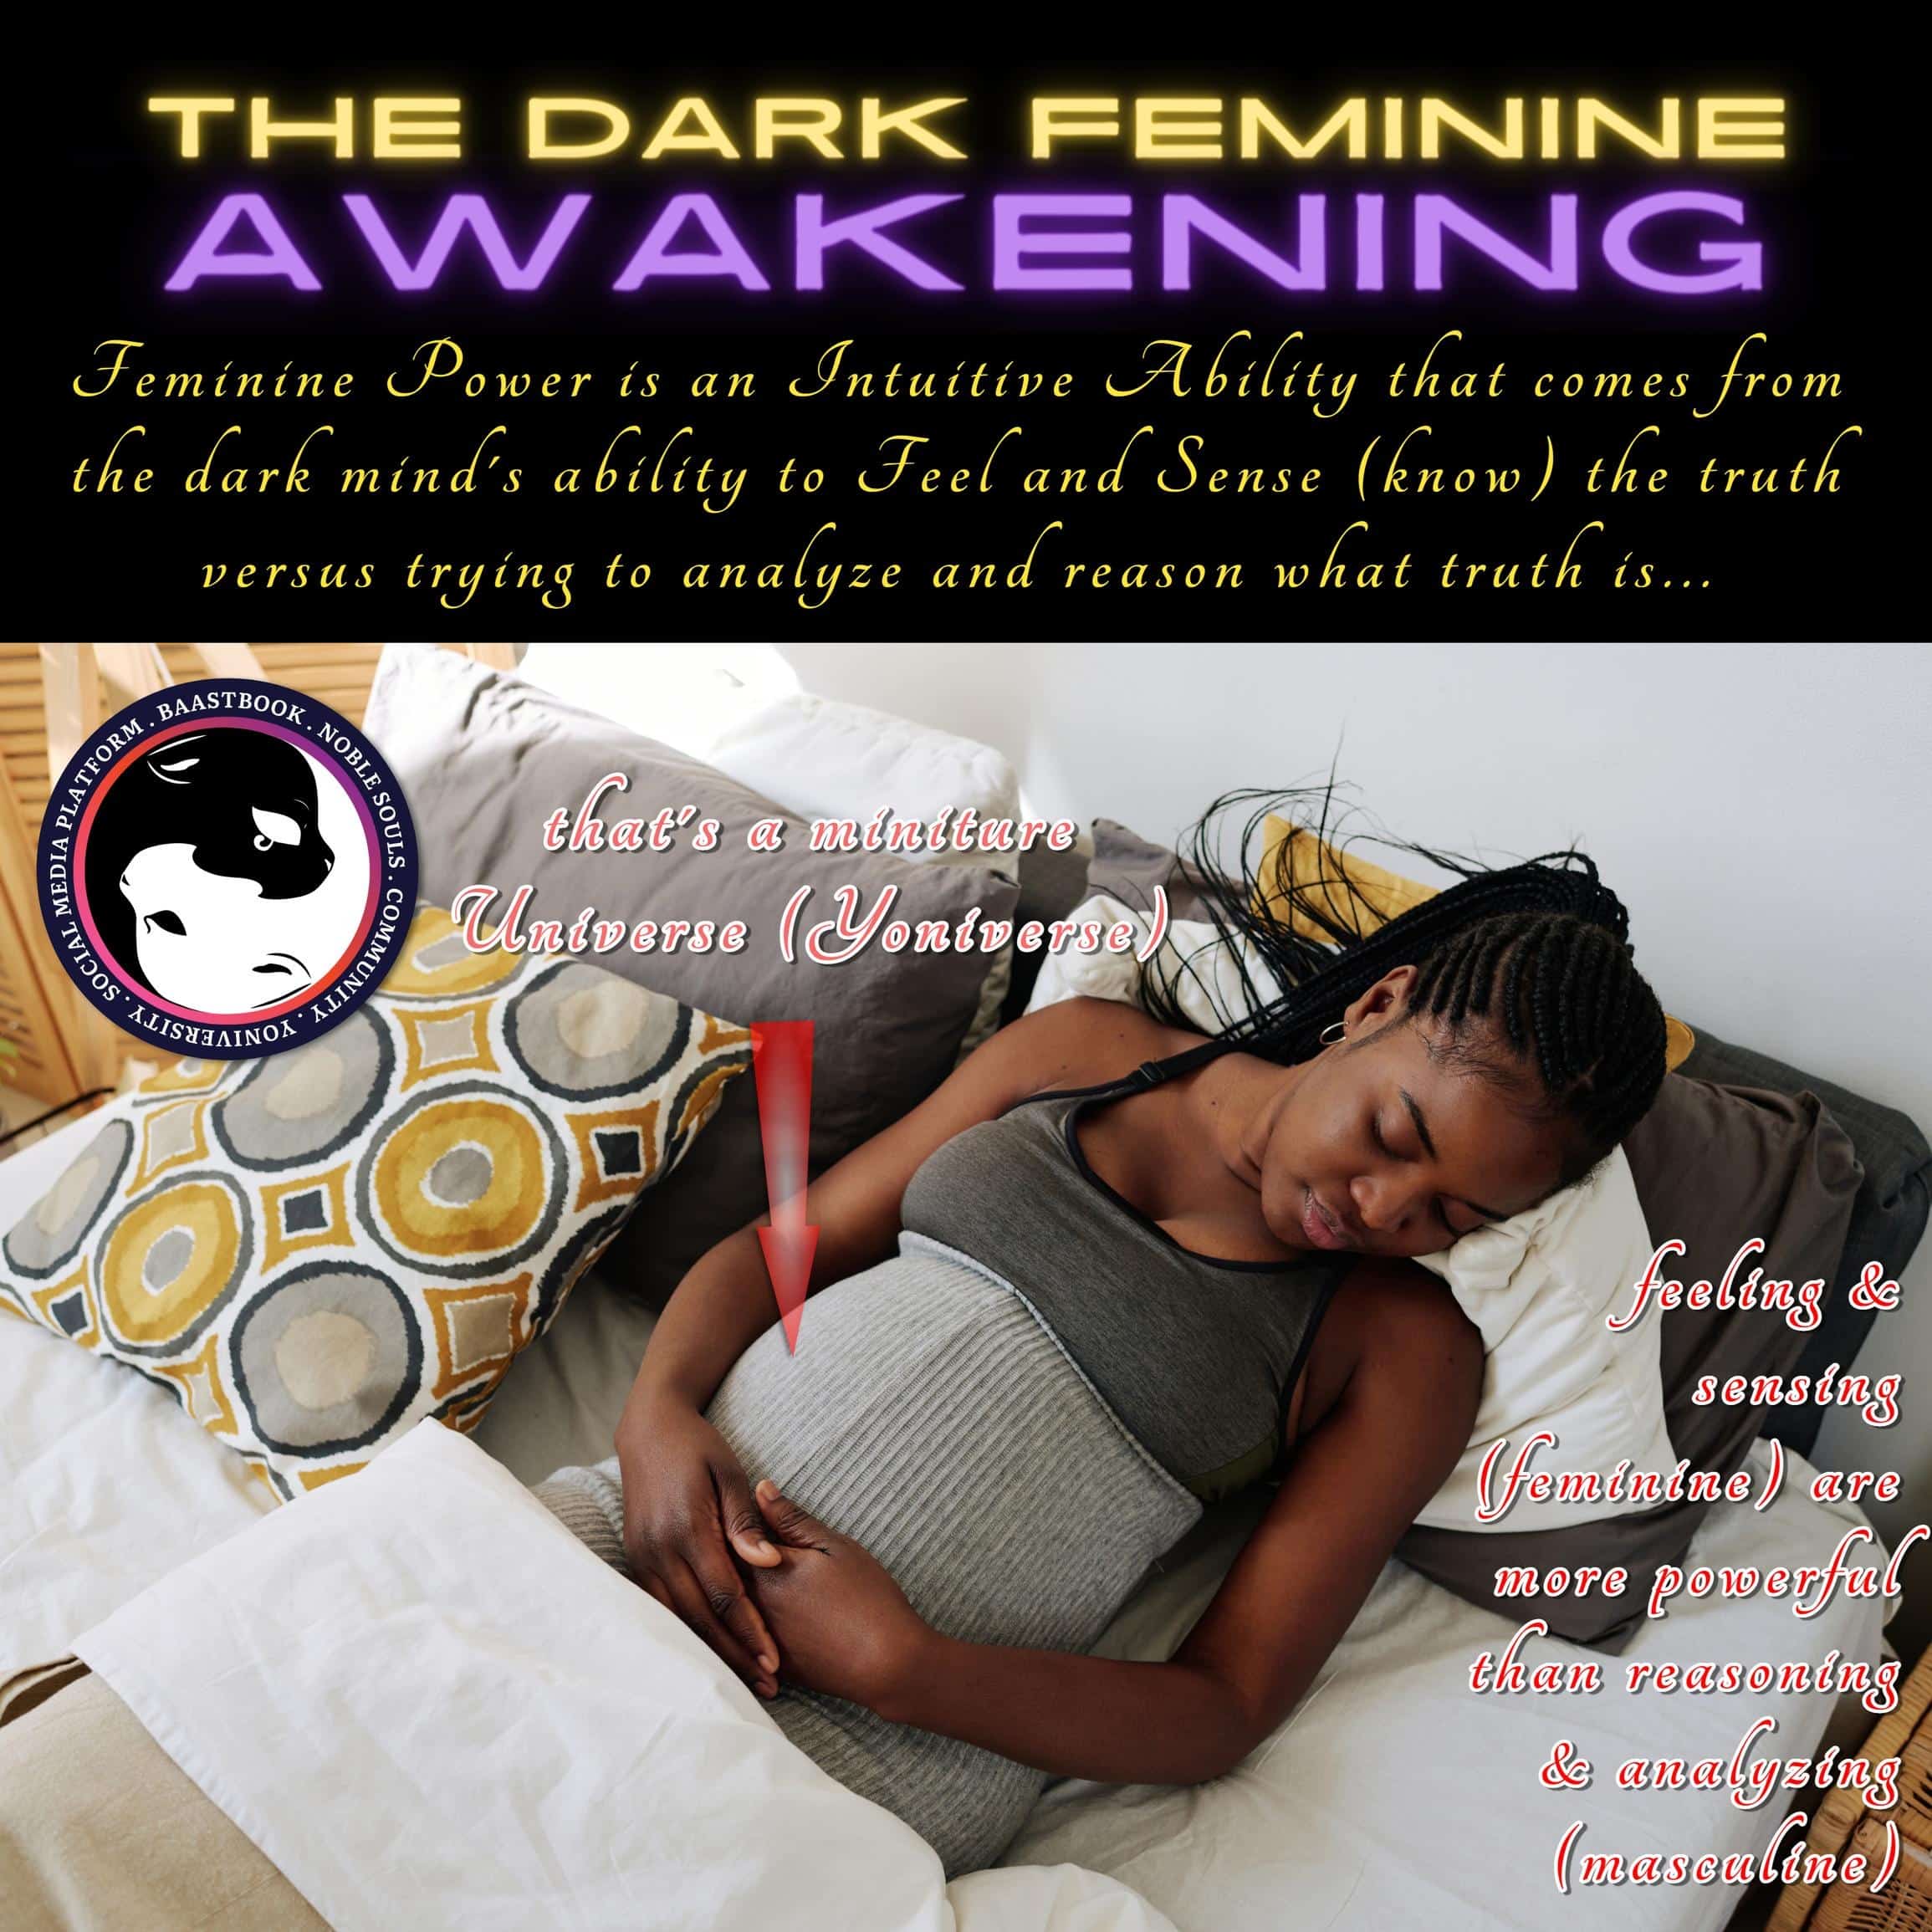 Feminine power feeling seensing intuitive knowledge reason analyze understand masculine black woman bed pregnang baby 02 Collage 1